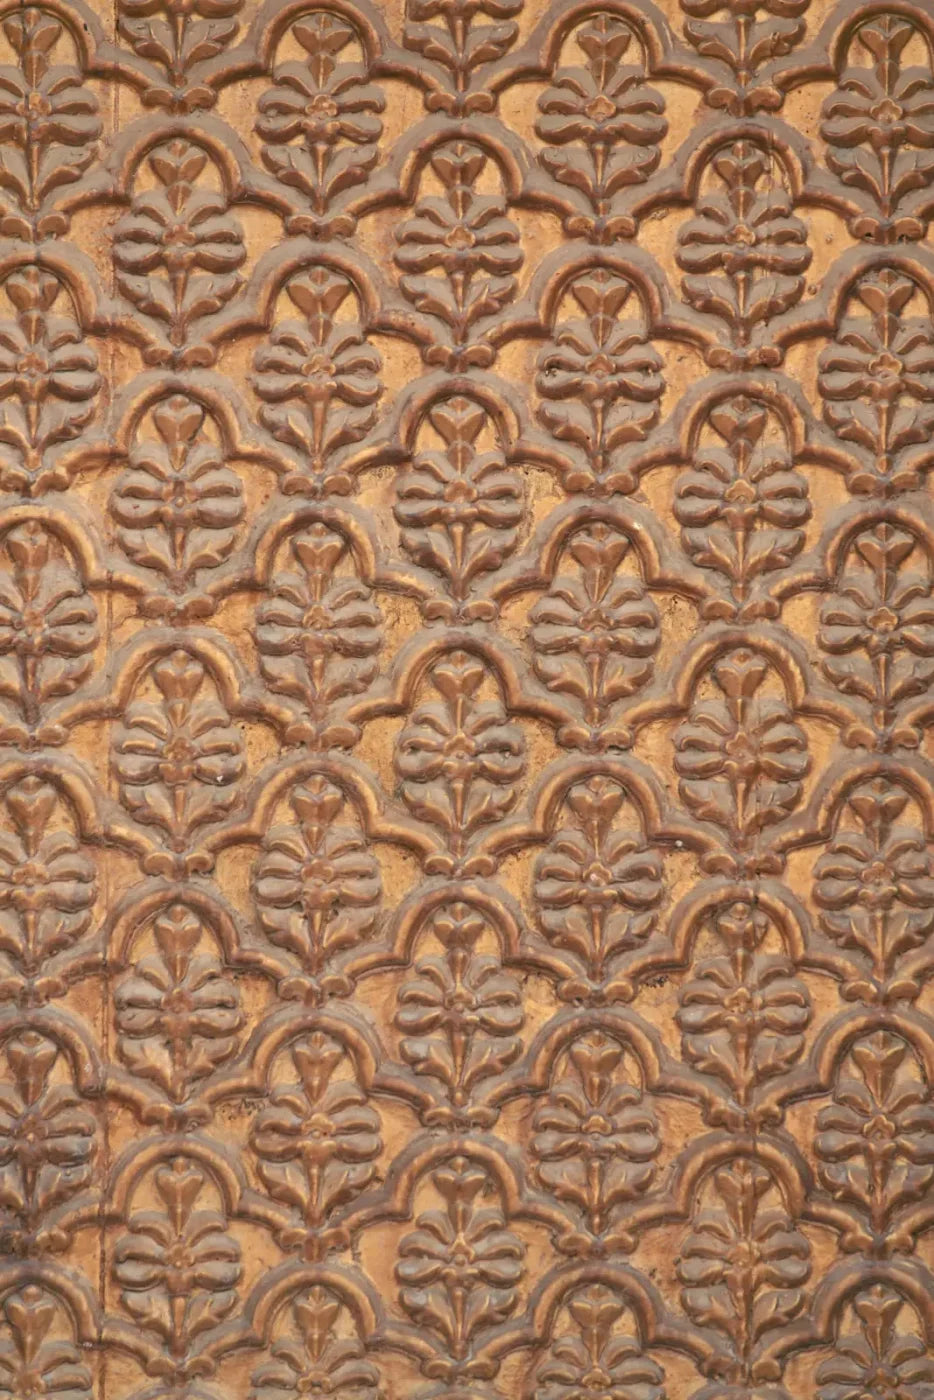 Carved 4X5 Rubbermat Floor ( 48 X 60 Inch ) Backdrop